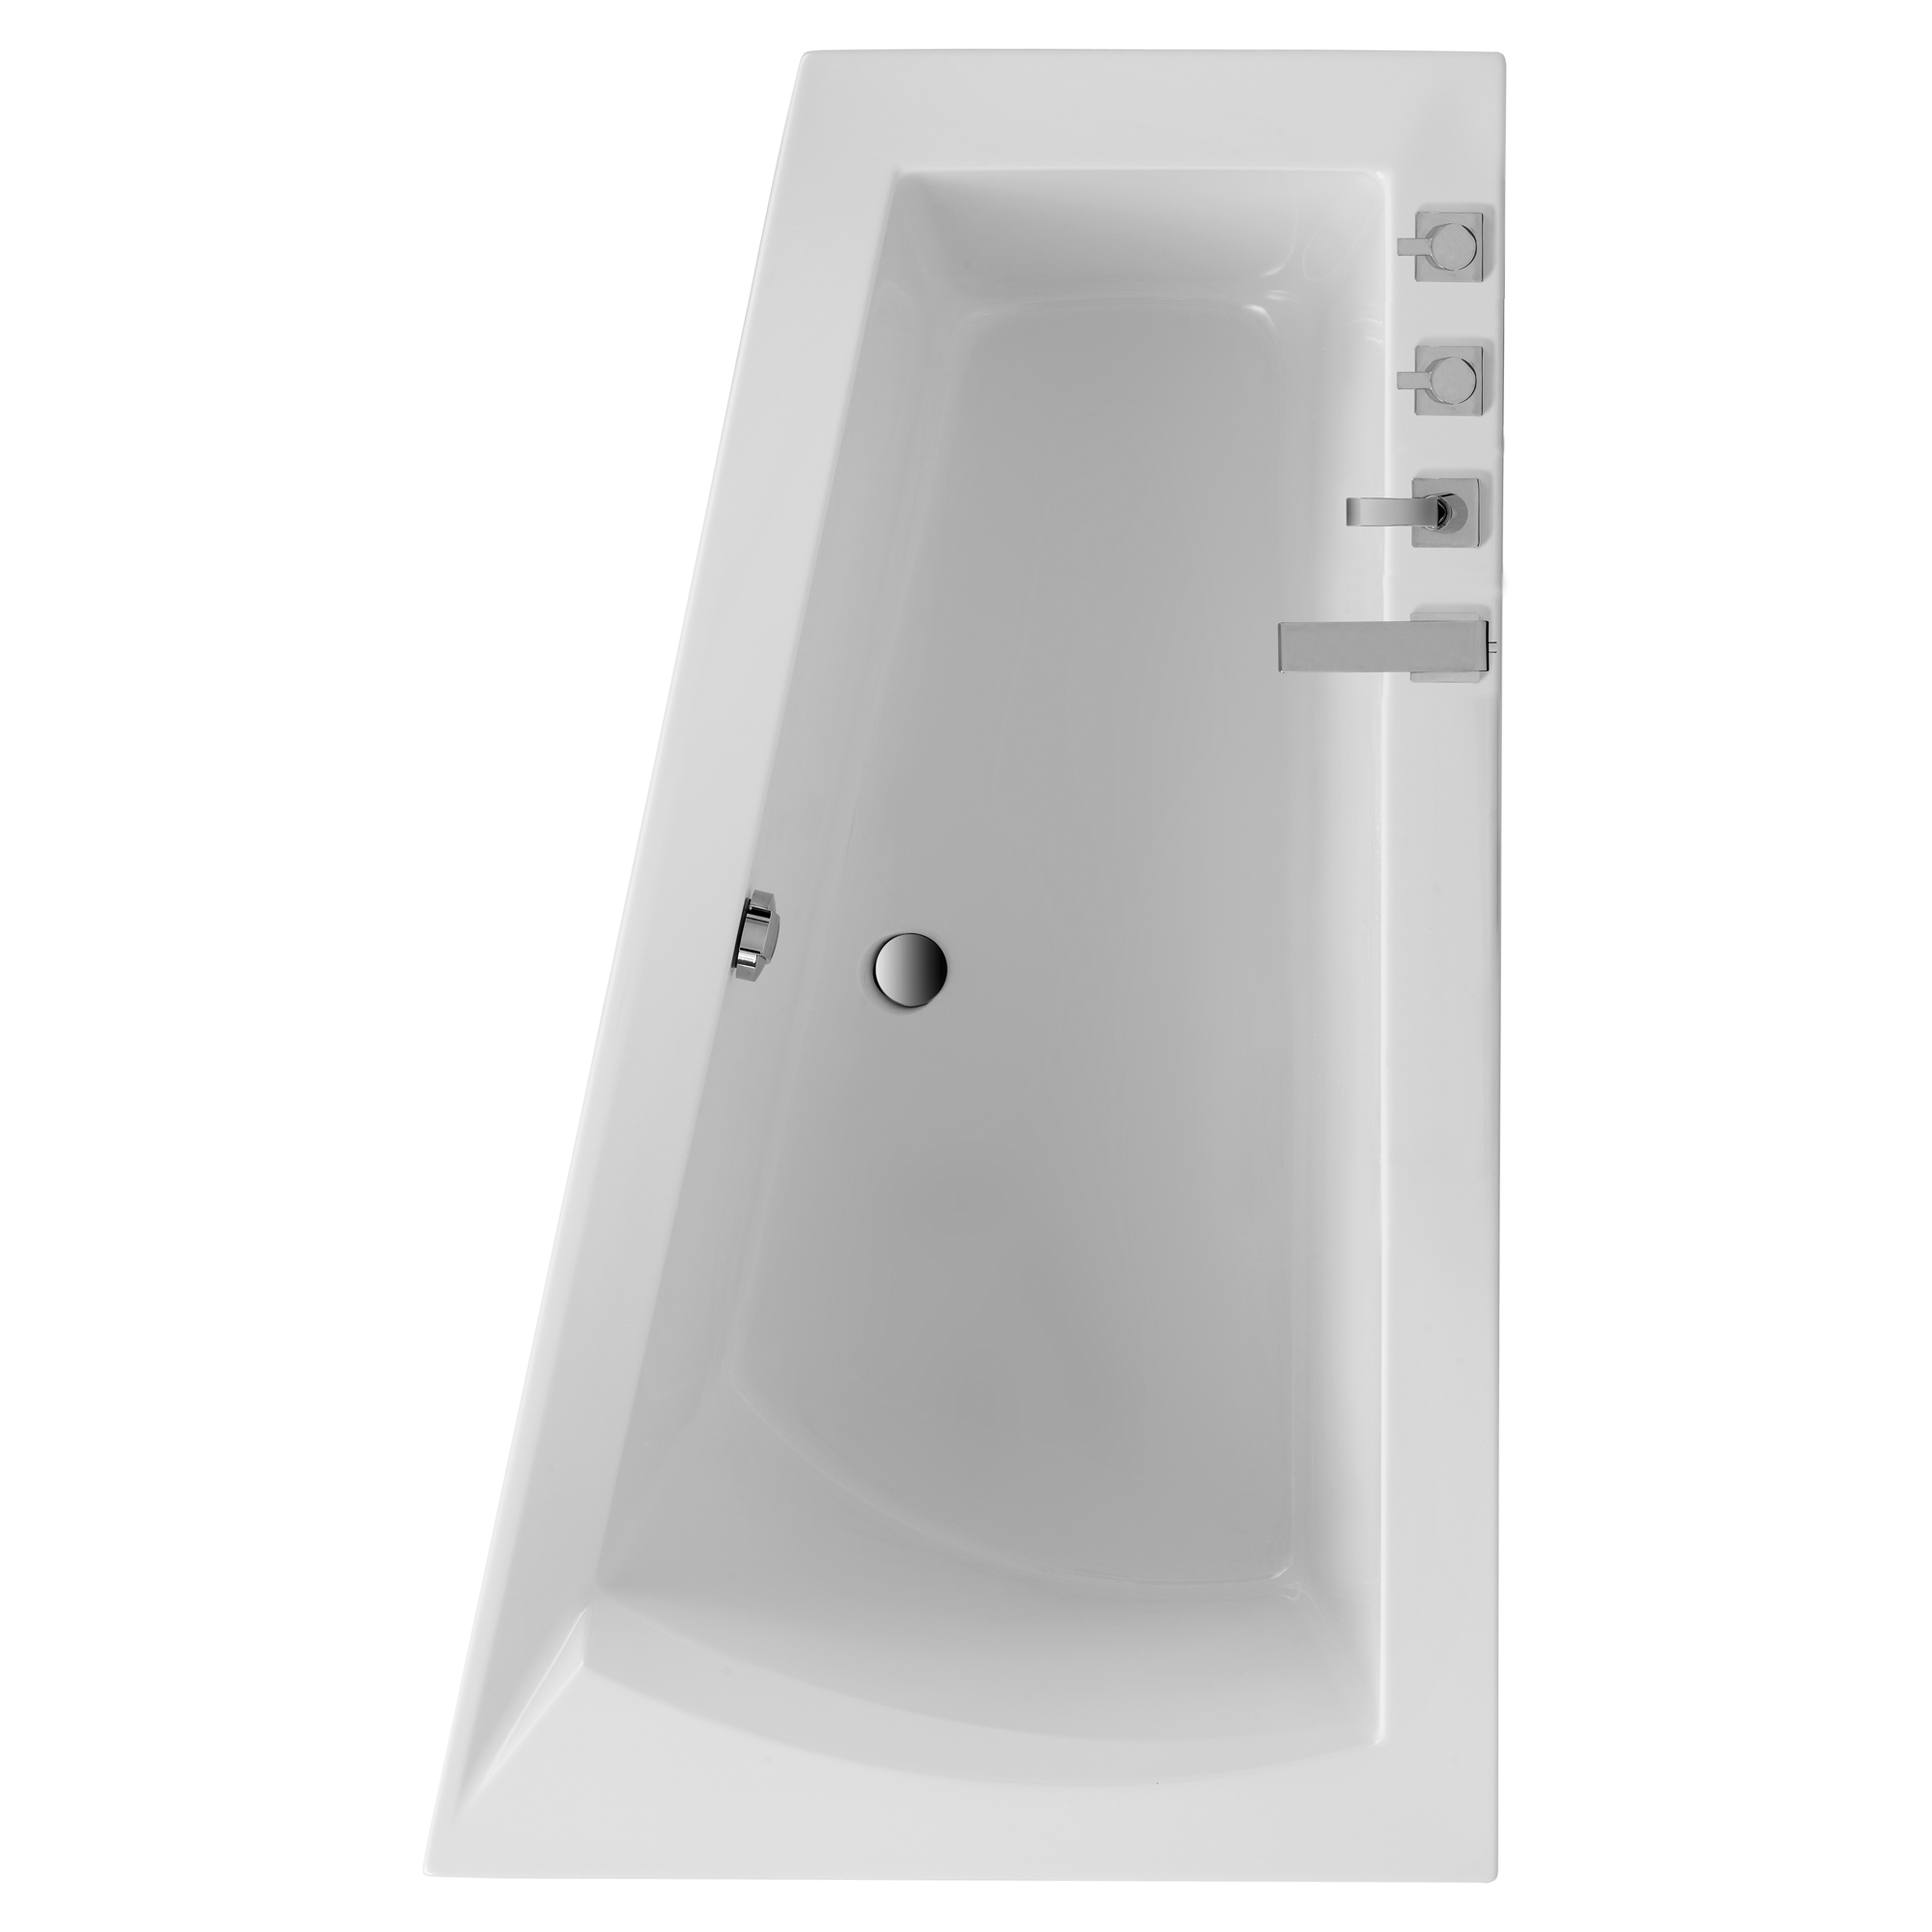 Badewanne "Galia" 170 x 100 cm Modell A + product picture